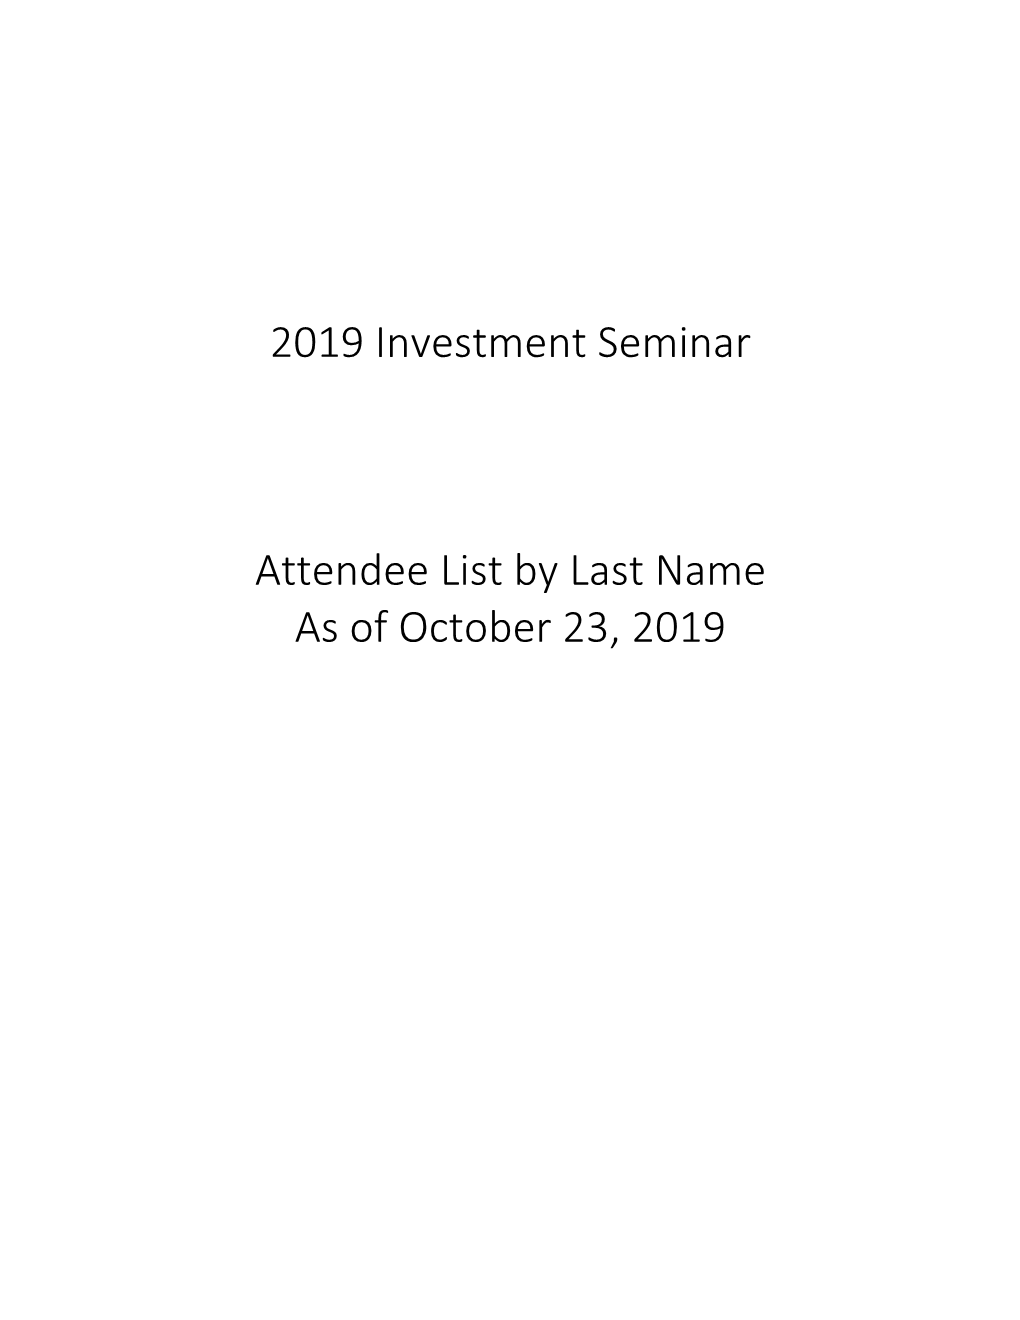 2019 Investment Seminar Attendee List by Last Name As Of